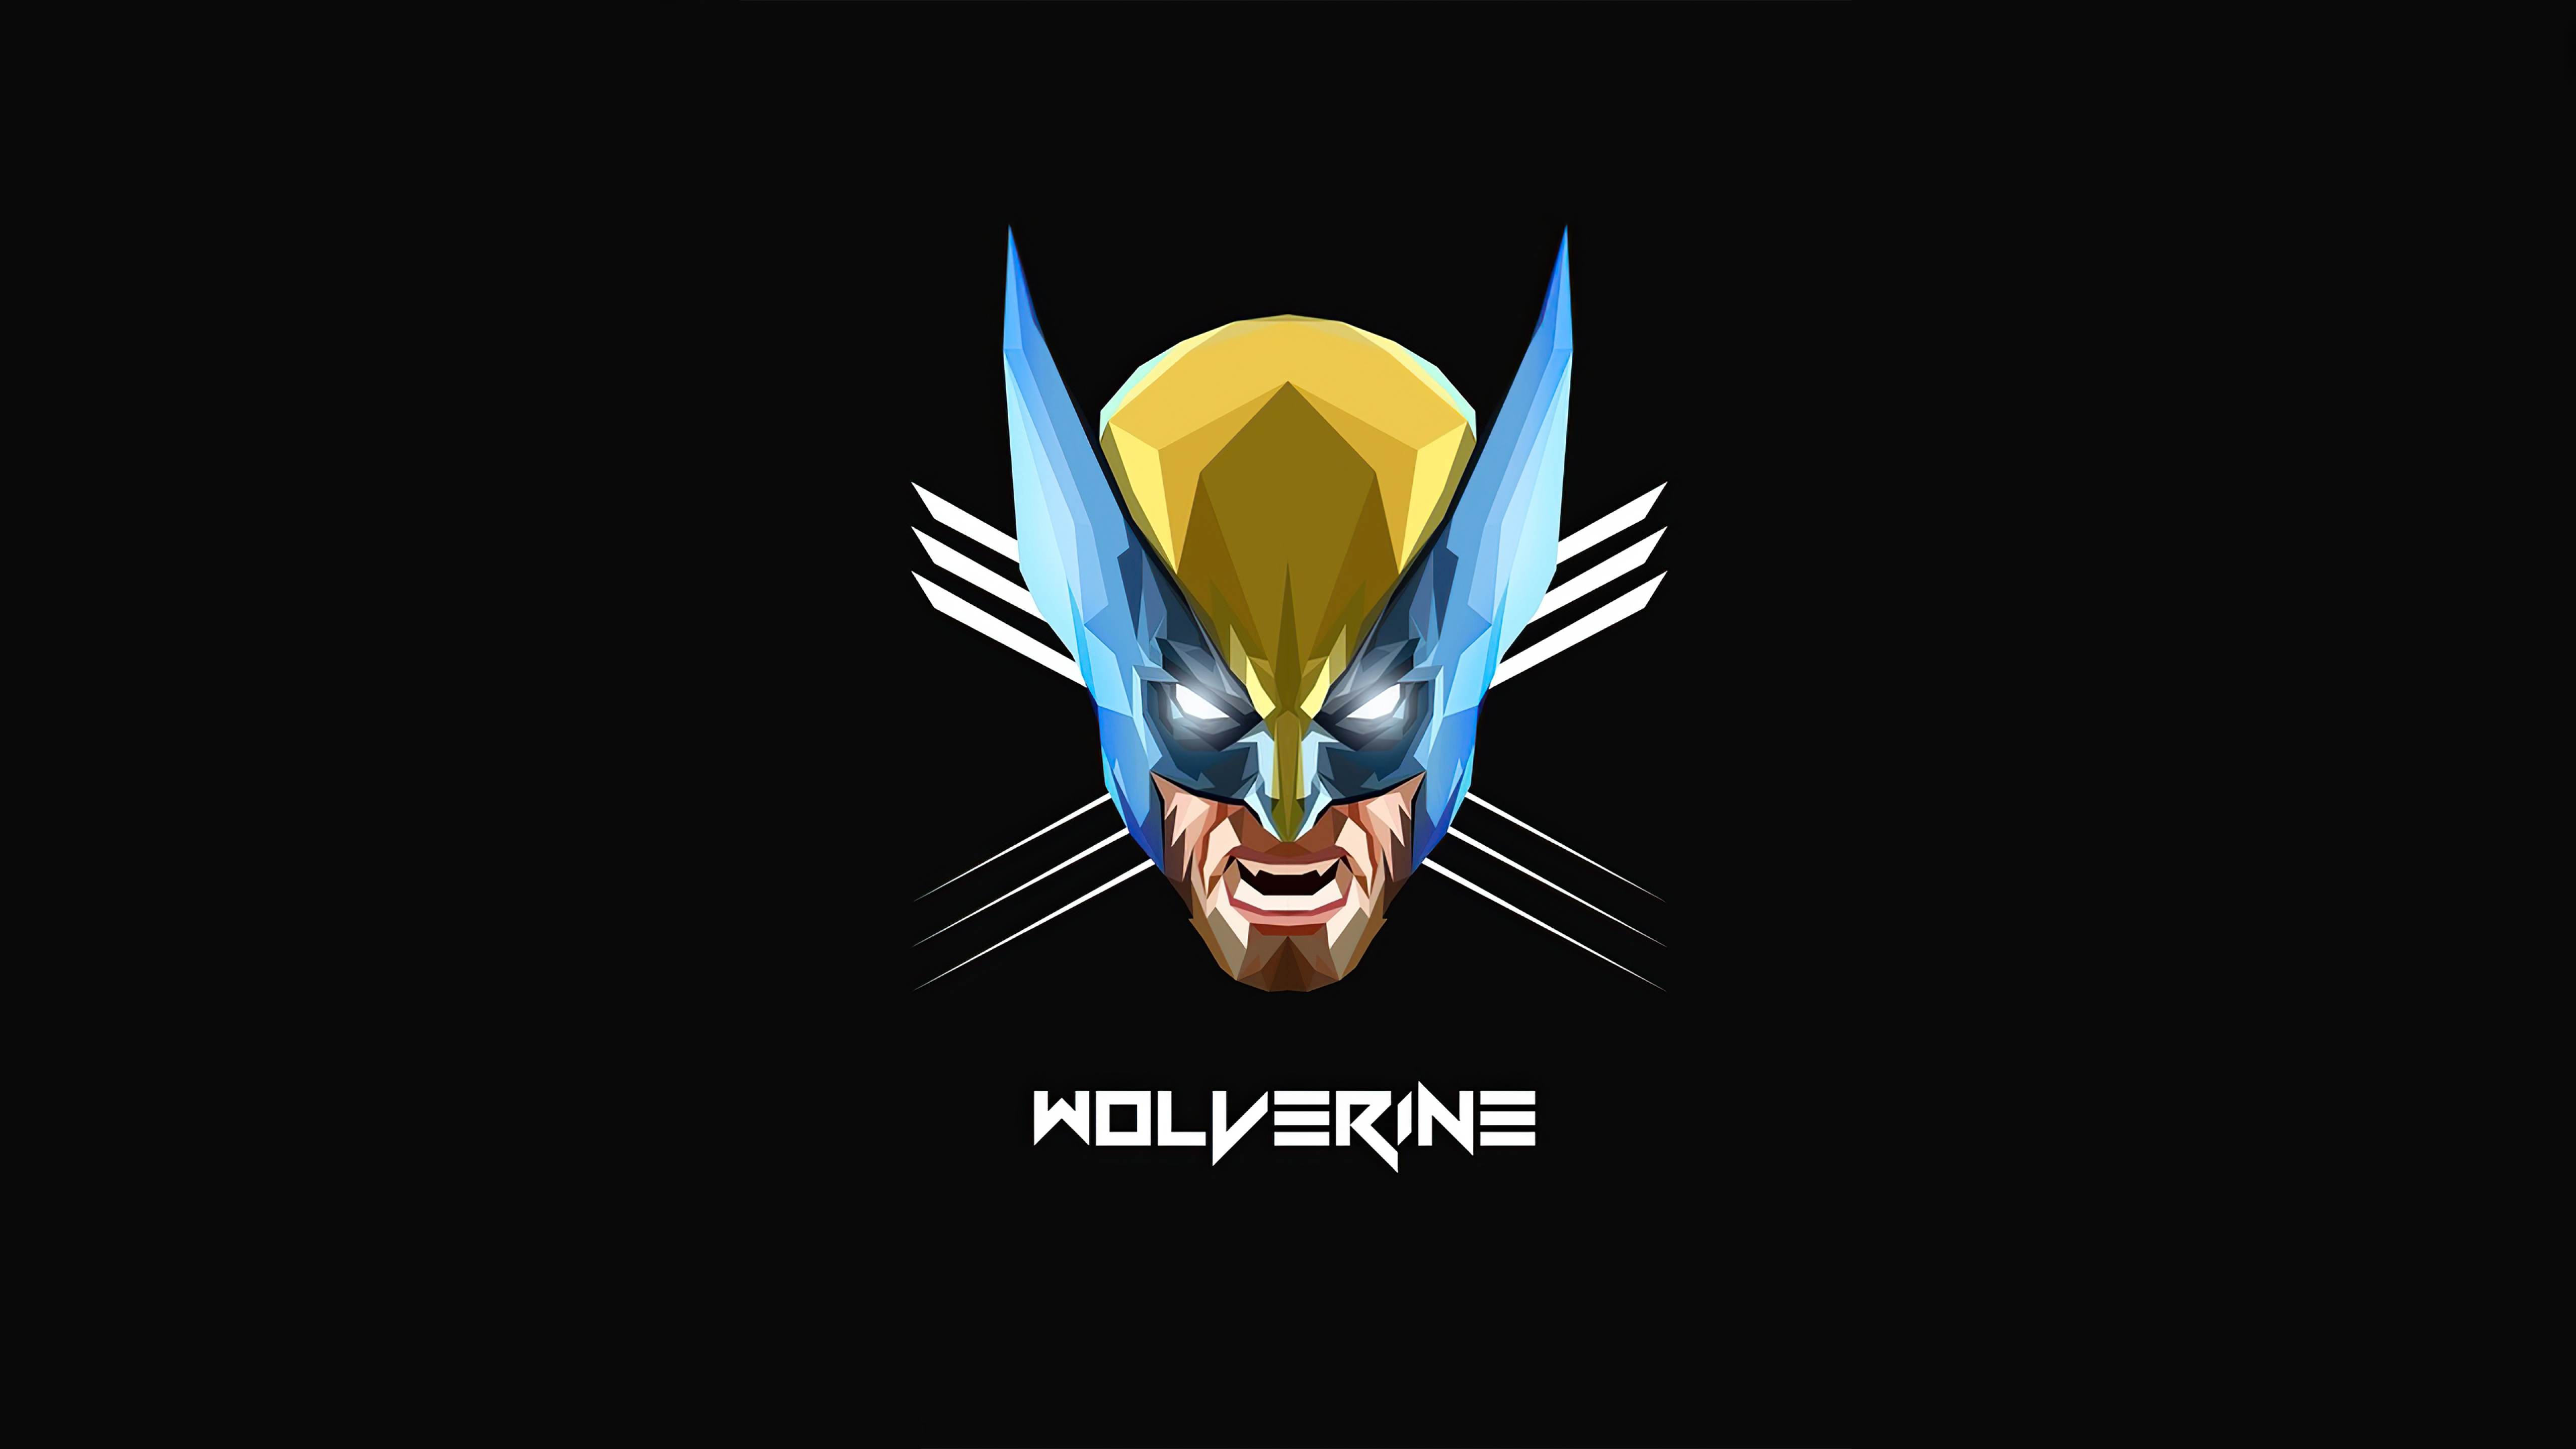 5120x2880 wolverine 4k 2020 5k wallpaper hd minimalist 4k wallpapers images photos and background wallpapersden